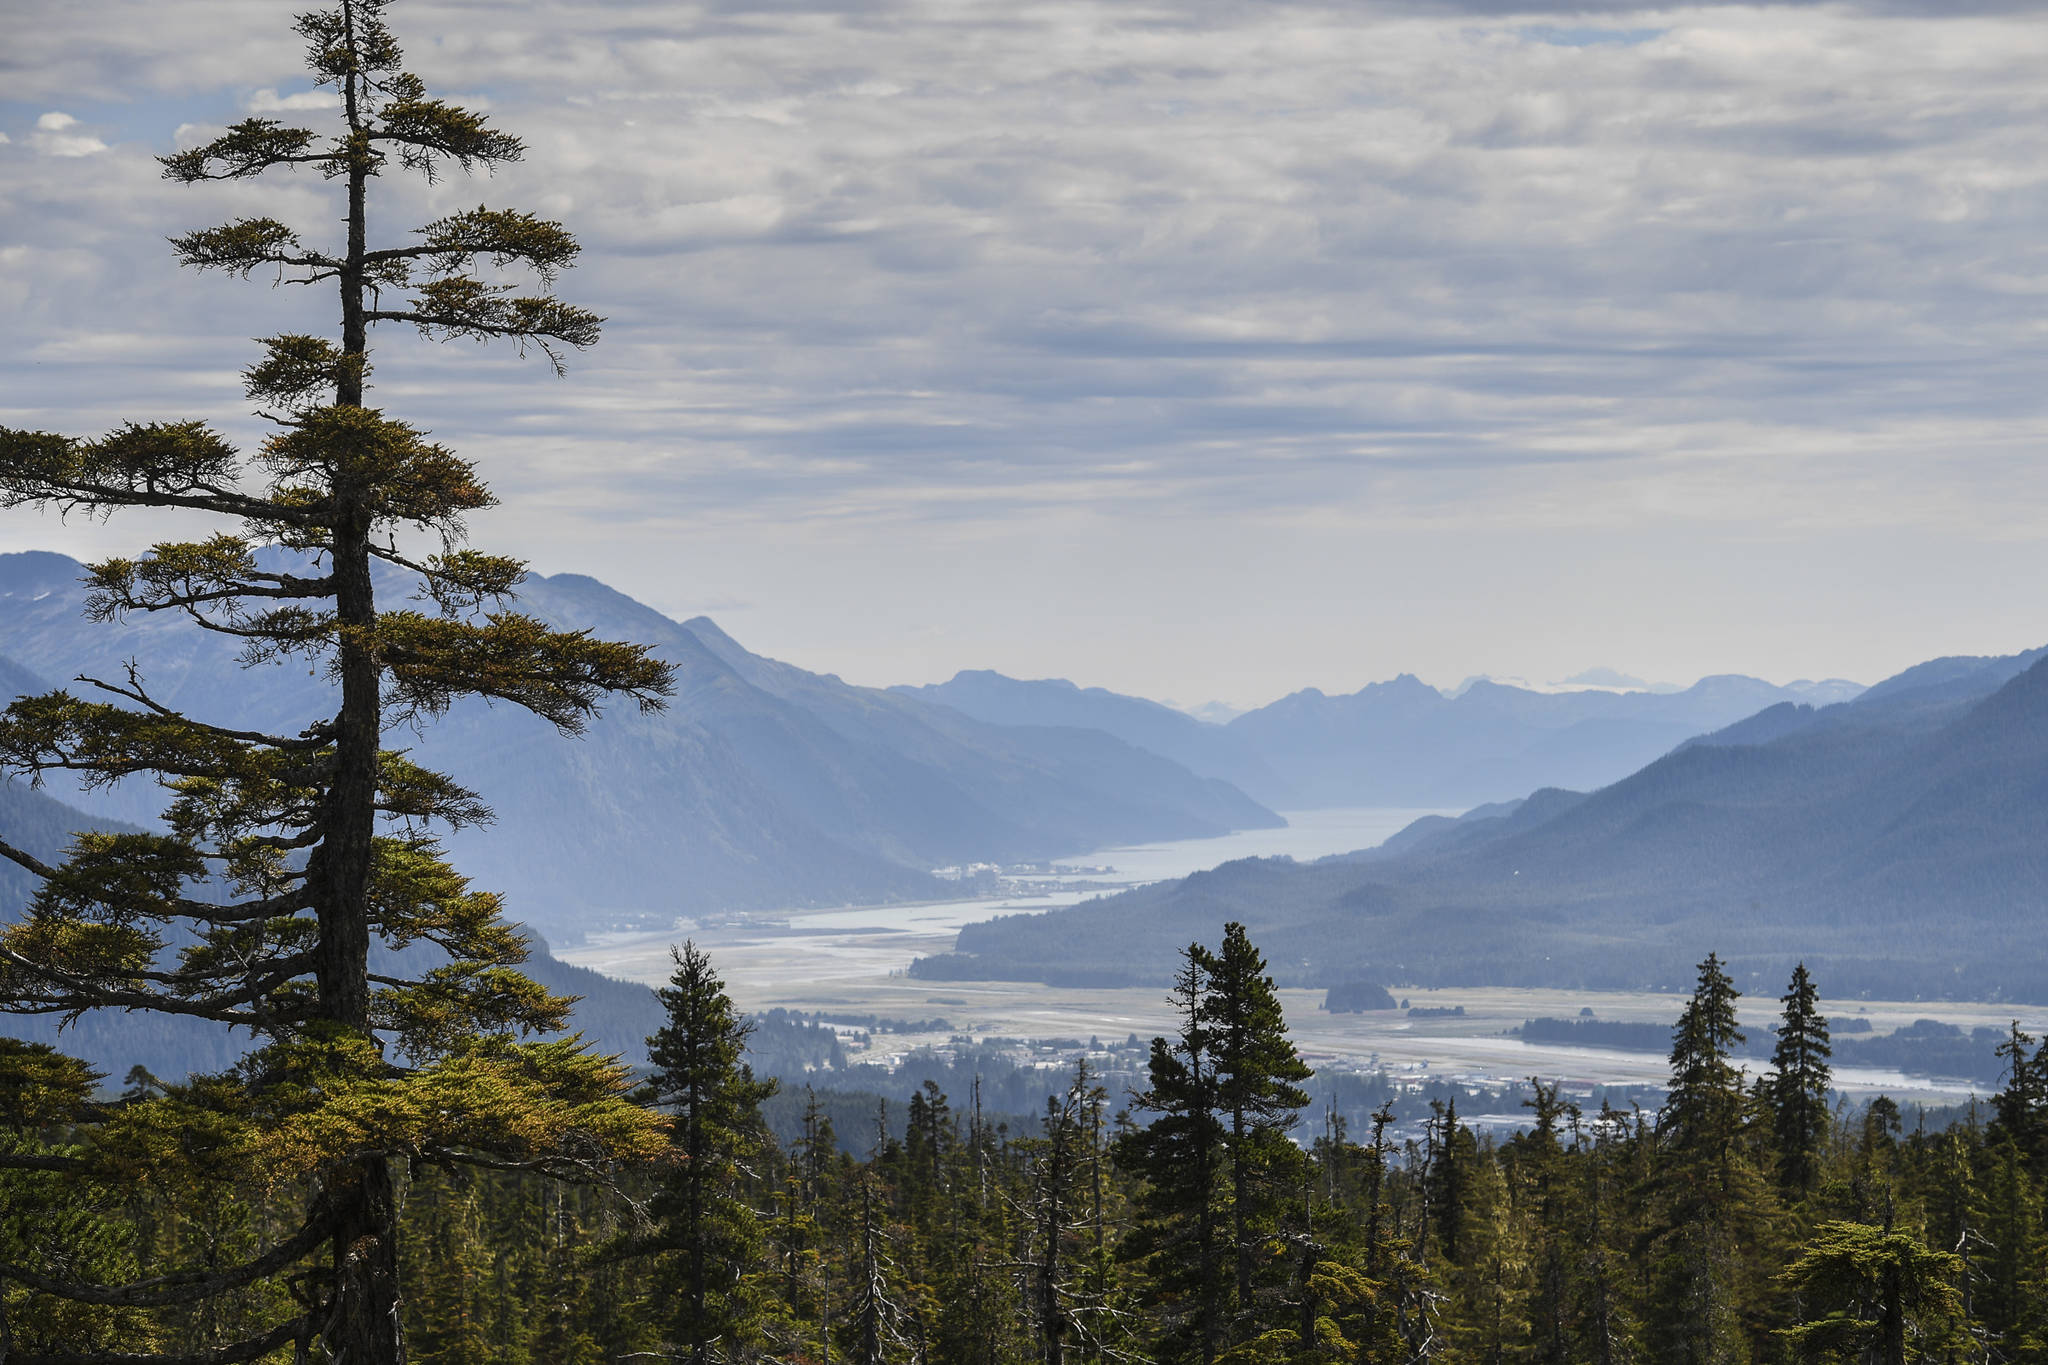 The view of Gasitneau Channel and Juneau from near the John Muir Cabin on Wednesday, Aug. 7, 2019. (Michael Penn | Juneau Empire)